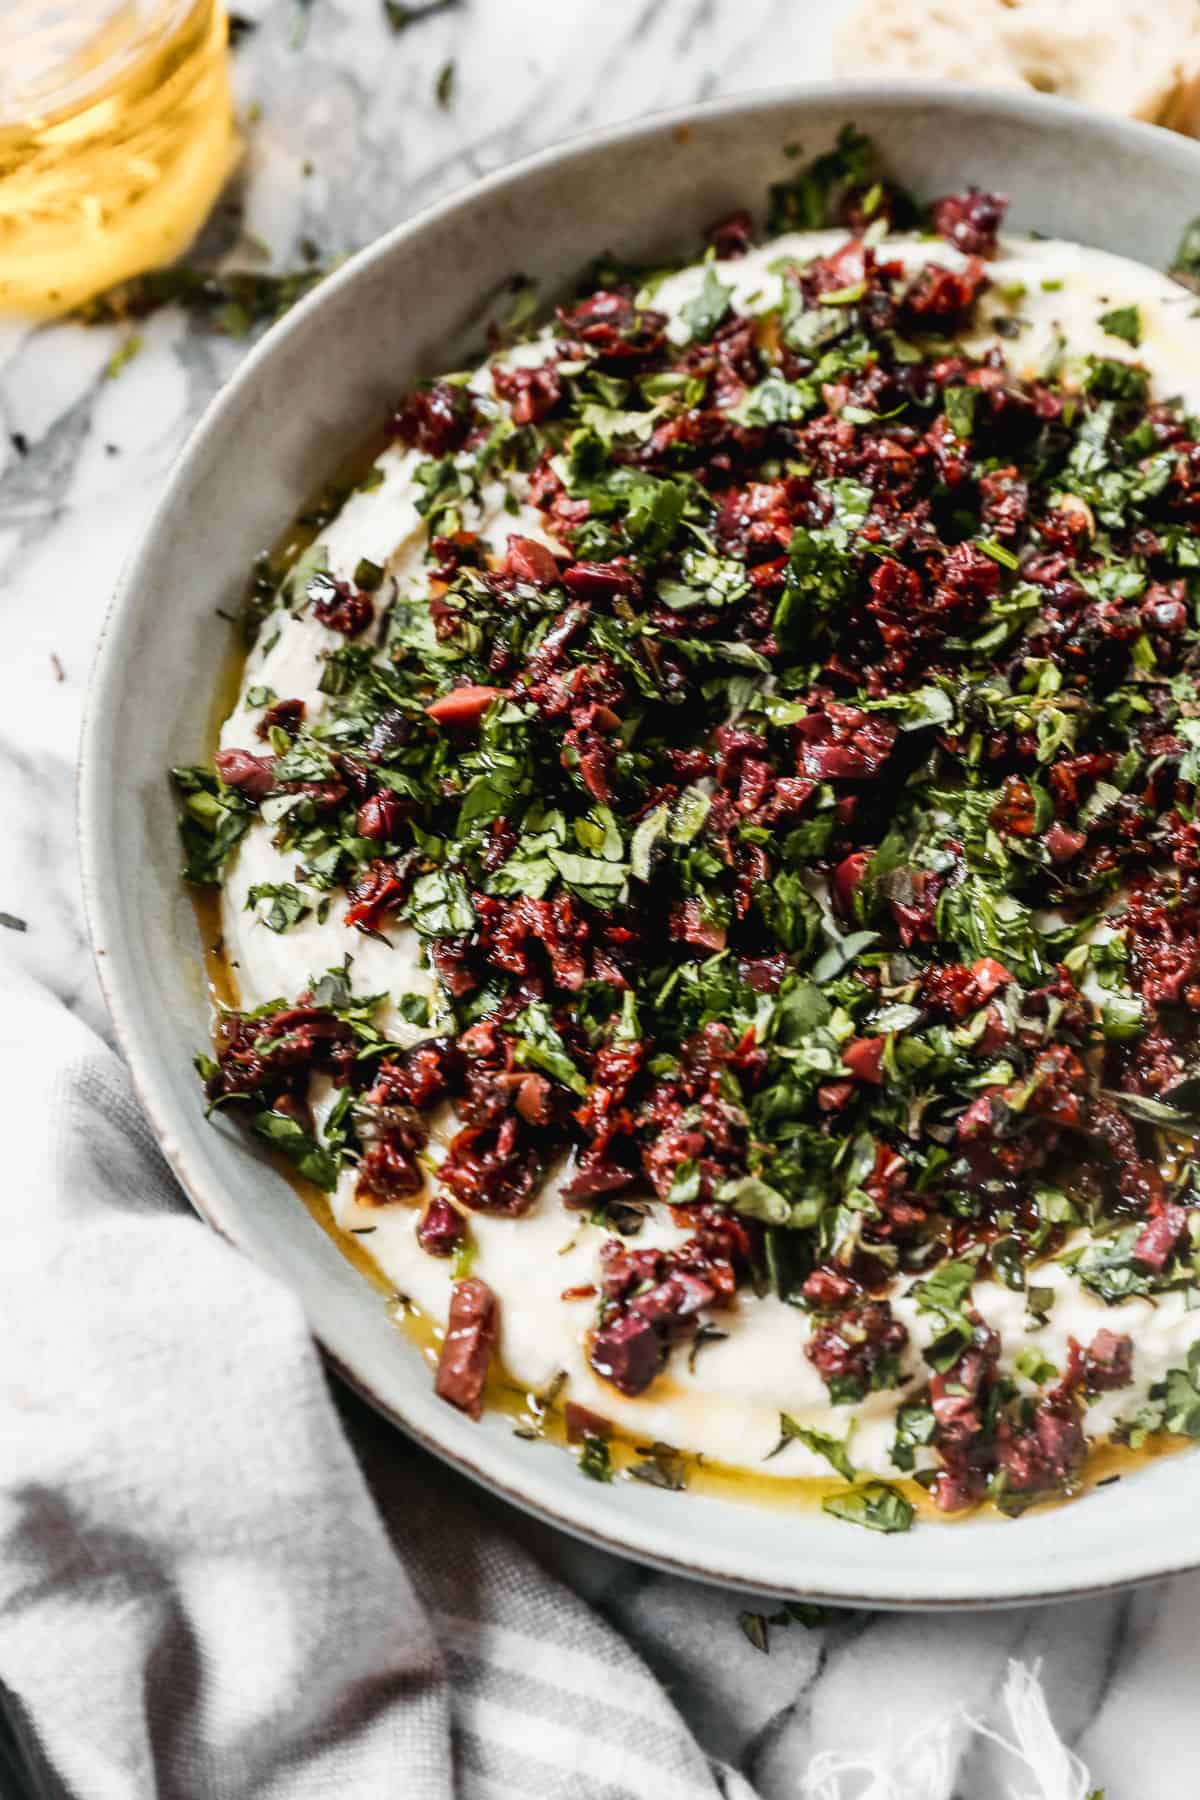 Whipped goat cheese with chopped sun-dried tomatoes, kalamata olives, basil, and oregano on top to make a delicious dip. 